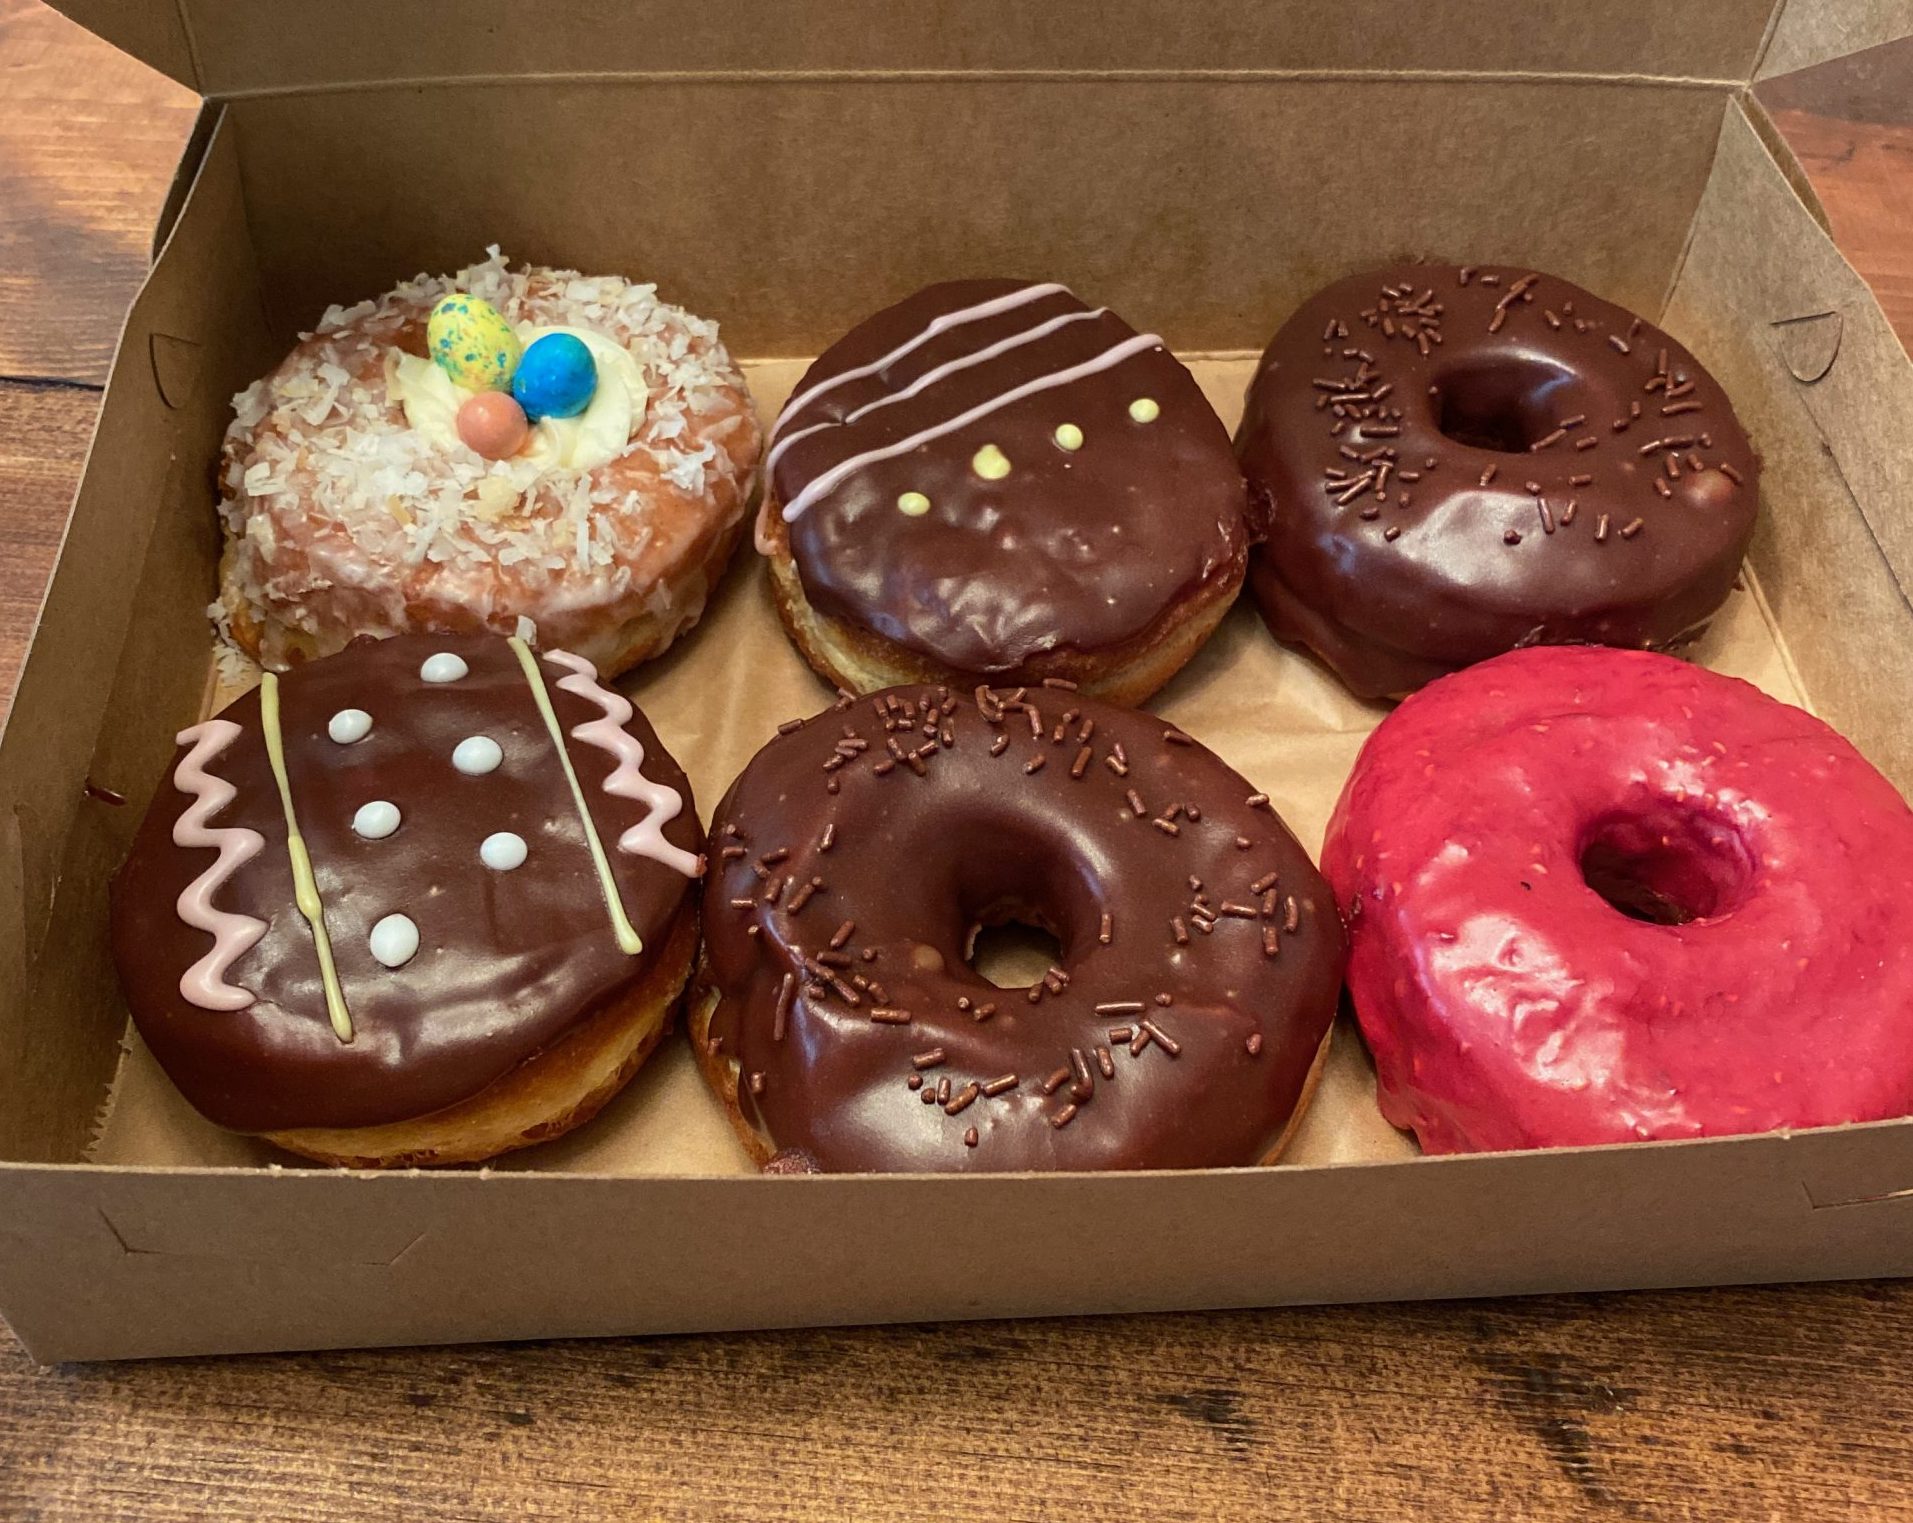 Donut Delivery from Glazed Gourmet Doughnuts